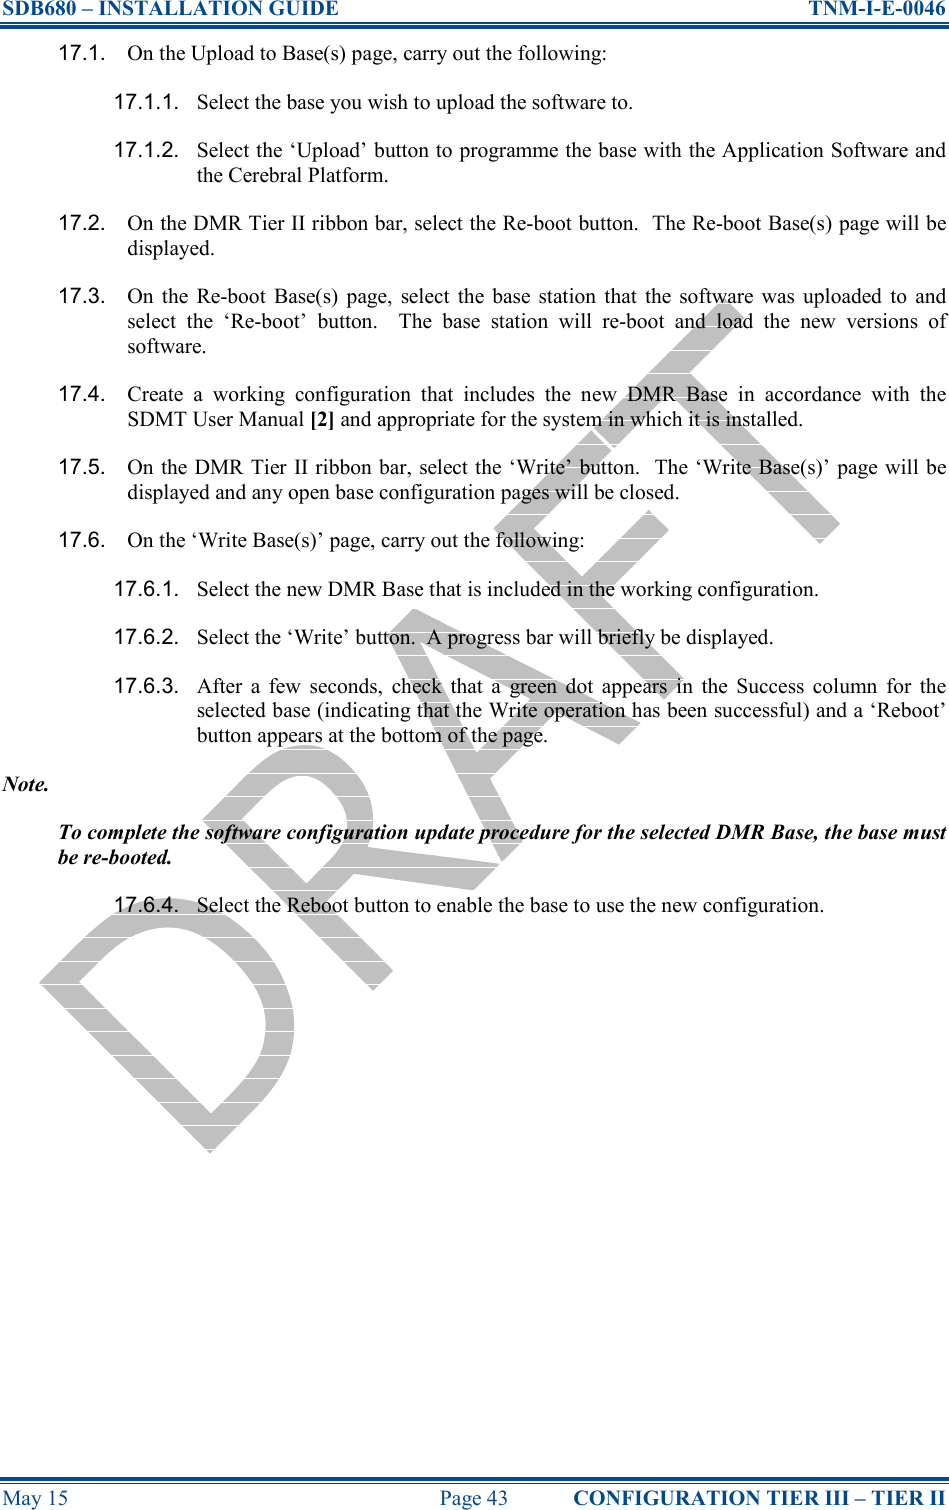 SDB680 – INSTALLATION GUIDE  TNM-I-E-0046 May 15  Page 43  CONFIGURATION TIER III – TIER II 17.1.  On the Upload to Base(s) page, carry out the following: 17.1.1.  Select the base you wish to upload the software to. 17.1.2.  Select the ‘Upload’ button to programme the base with the Application Software and the Cerebral Platform. 17.2.  On the DMR Tier II ribbon bar, select the Re-boot button.  The Re-boot Base(s) page will be displayed. 17.3.  On  the  Re-boot  Base(s)  page,  select  the  base  station that  the  software  was  uploaded  to  and select  the  ‘Re-boot’  button.    The  base  station  will  re-boot  and  load  the  new  versions  of software. 17.4.  Create  a  working  configuration  that  includes  the  new  DMR  Base  in  accordance  with  the SDMT User Manual [2] and appropriate for the system in which it is installed. 17.5.  On the DMR Tier II ribbon bar, select the ‘Write’ button.  The ‘Write Base(s)’ page will be displayed and any open base configuration pages will be closed. 17.6.  On the ‘Write Base(s)’ page, carry out the following: 17.6.1.  Select the new DMR Base that is included in the working configuration. 17.6.2.  Select the ‘Write’ button.  A progress bar will briefly be displayed. 17.6.3.  After  a  few  seconds,  check  that  a  green  dot  appears  in  the  Success  column  for  the selected base (indicating that the Write operation has been successful) and a ‘Reboot’ button appears at the bottom of the page. Note. To complete the software configuration update procedure for the selected DMR Base, the base must be re-booted. 17.6.4.  Select the Reboot button to enable the base to use the new configuration.     